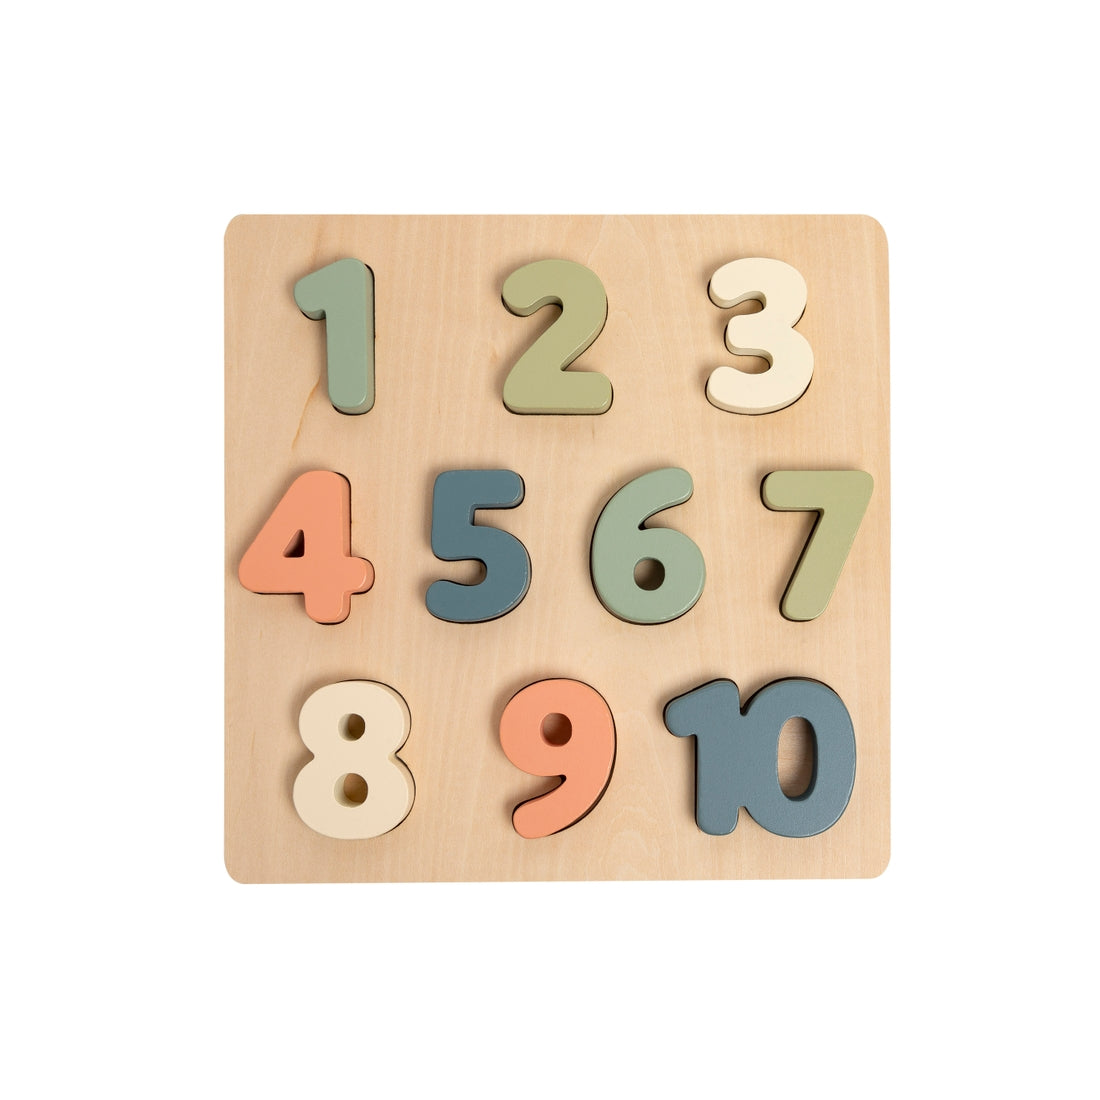 Pearhead wooden number puzzle against white backdrop